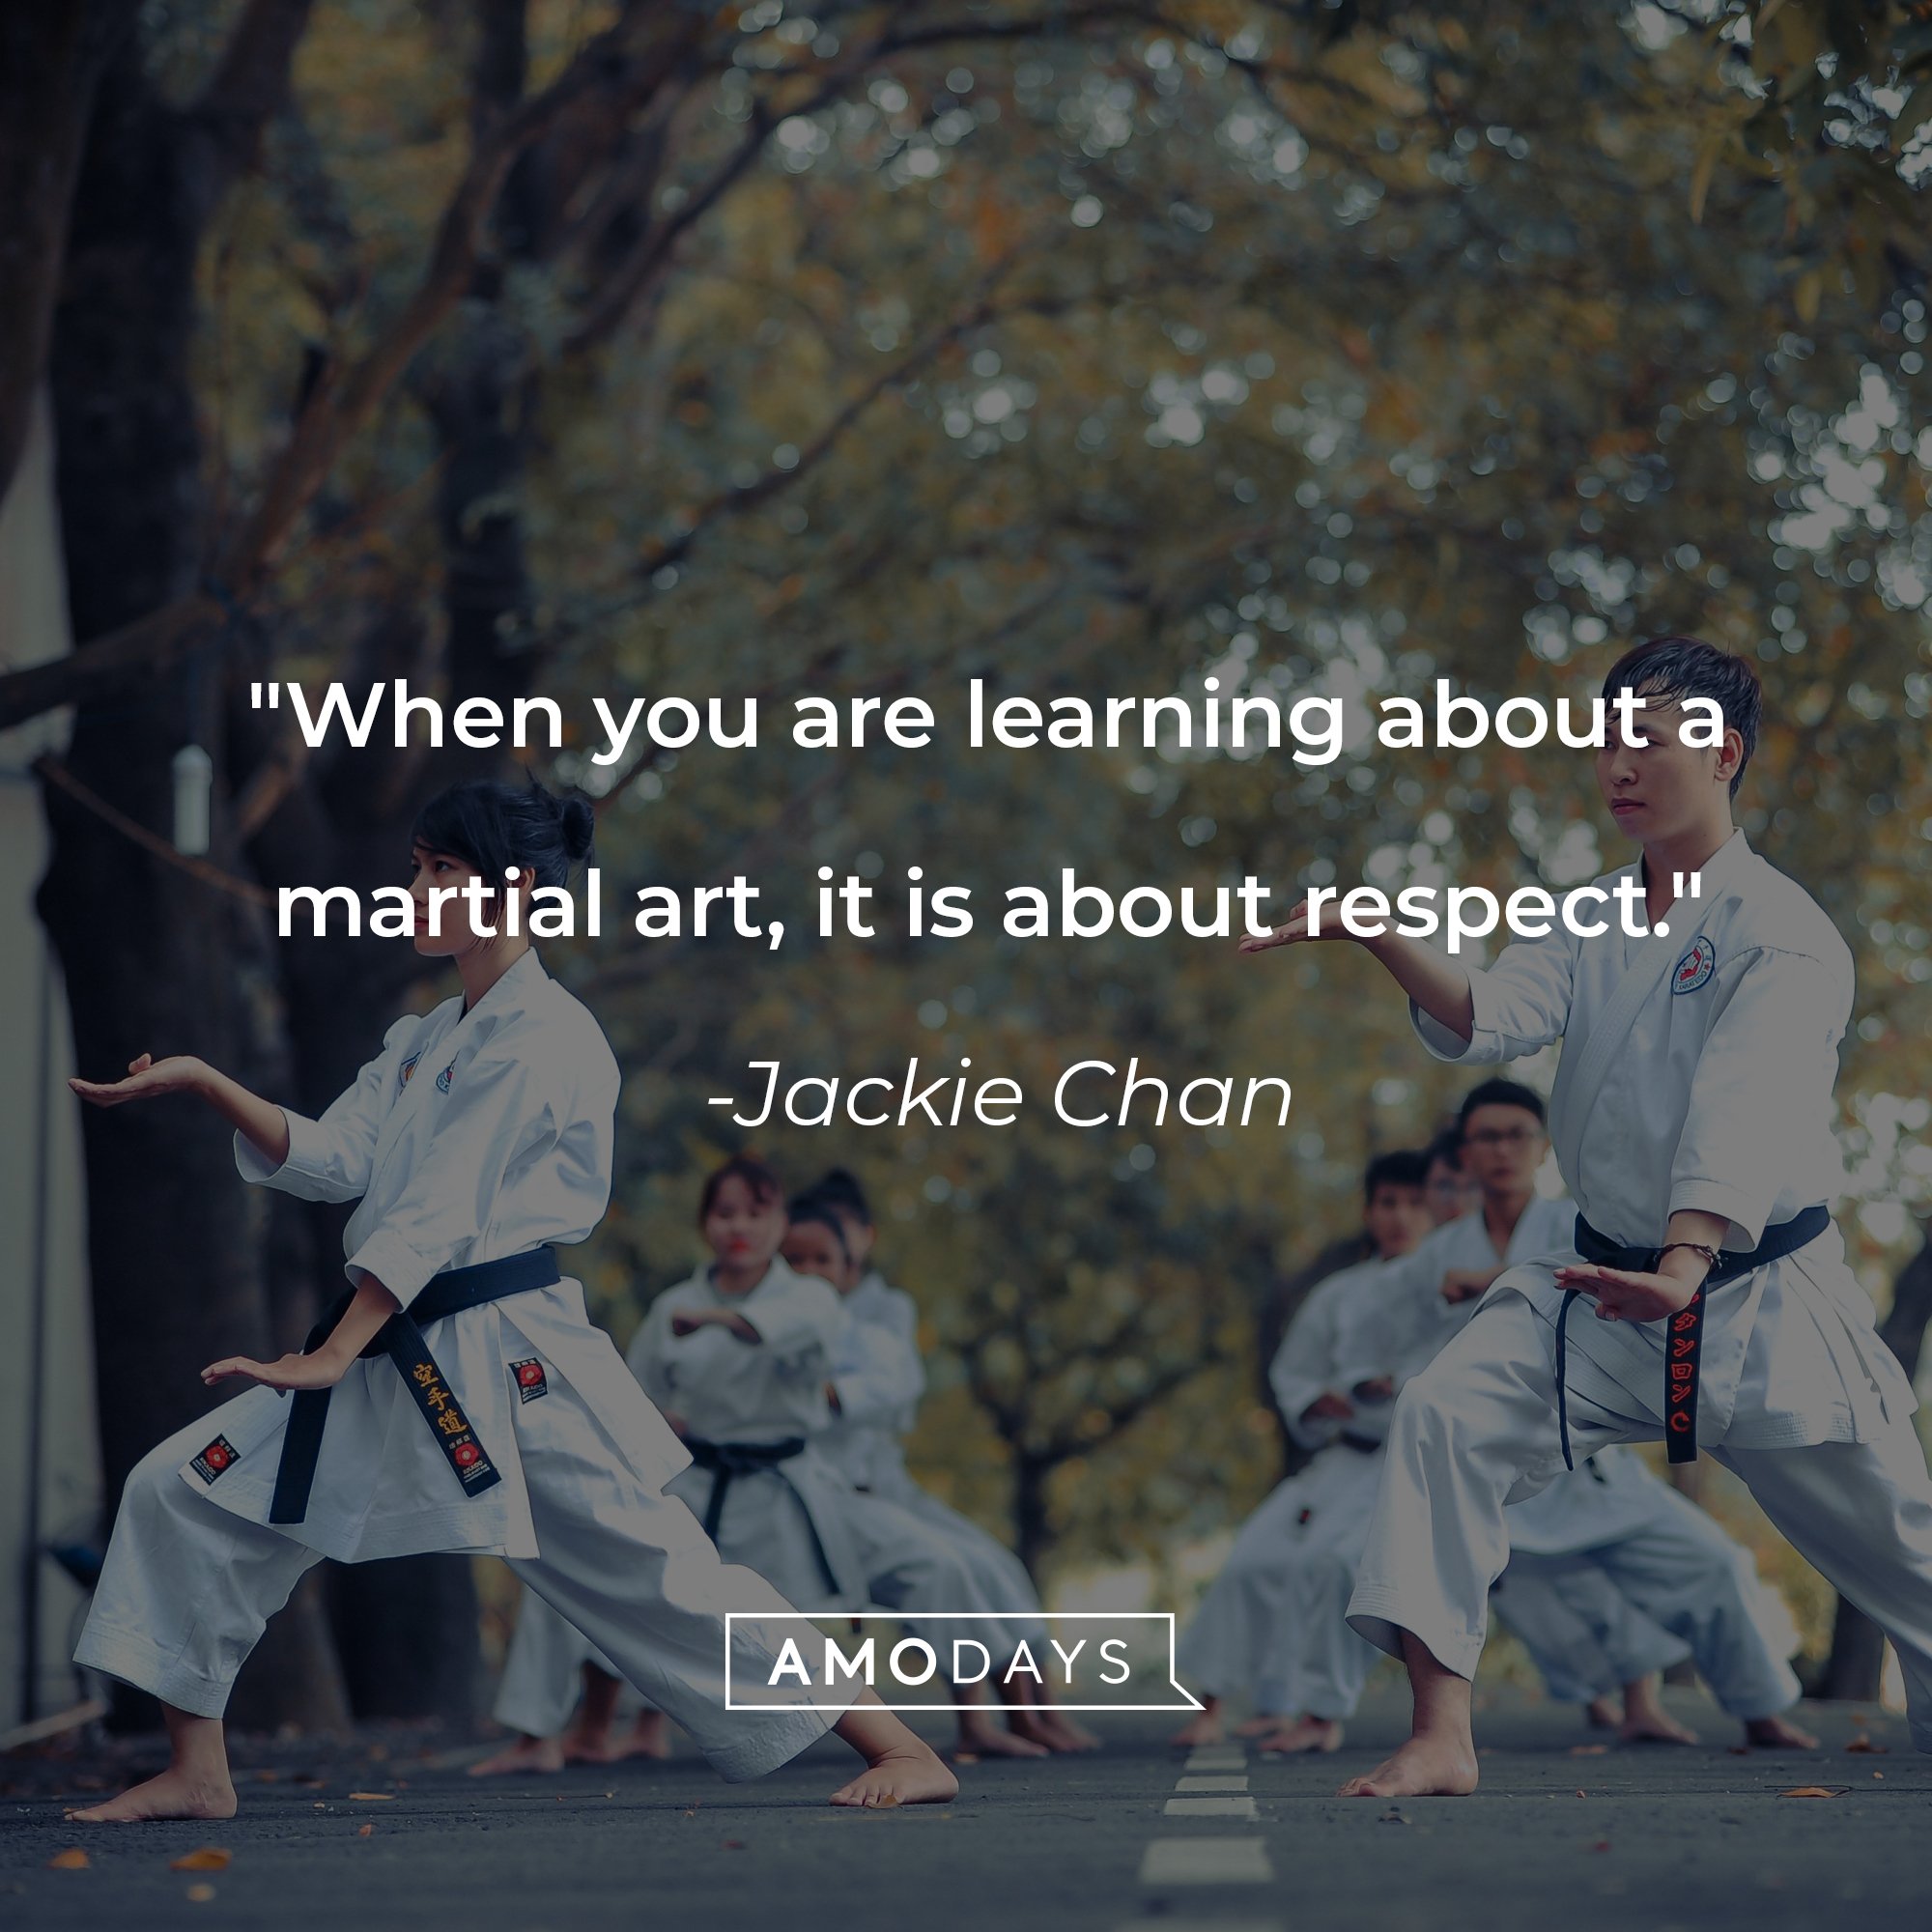 Jackie Chan’s quote: "When you are learning about a martial art, it is about respect." | Image: AmoDays   